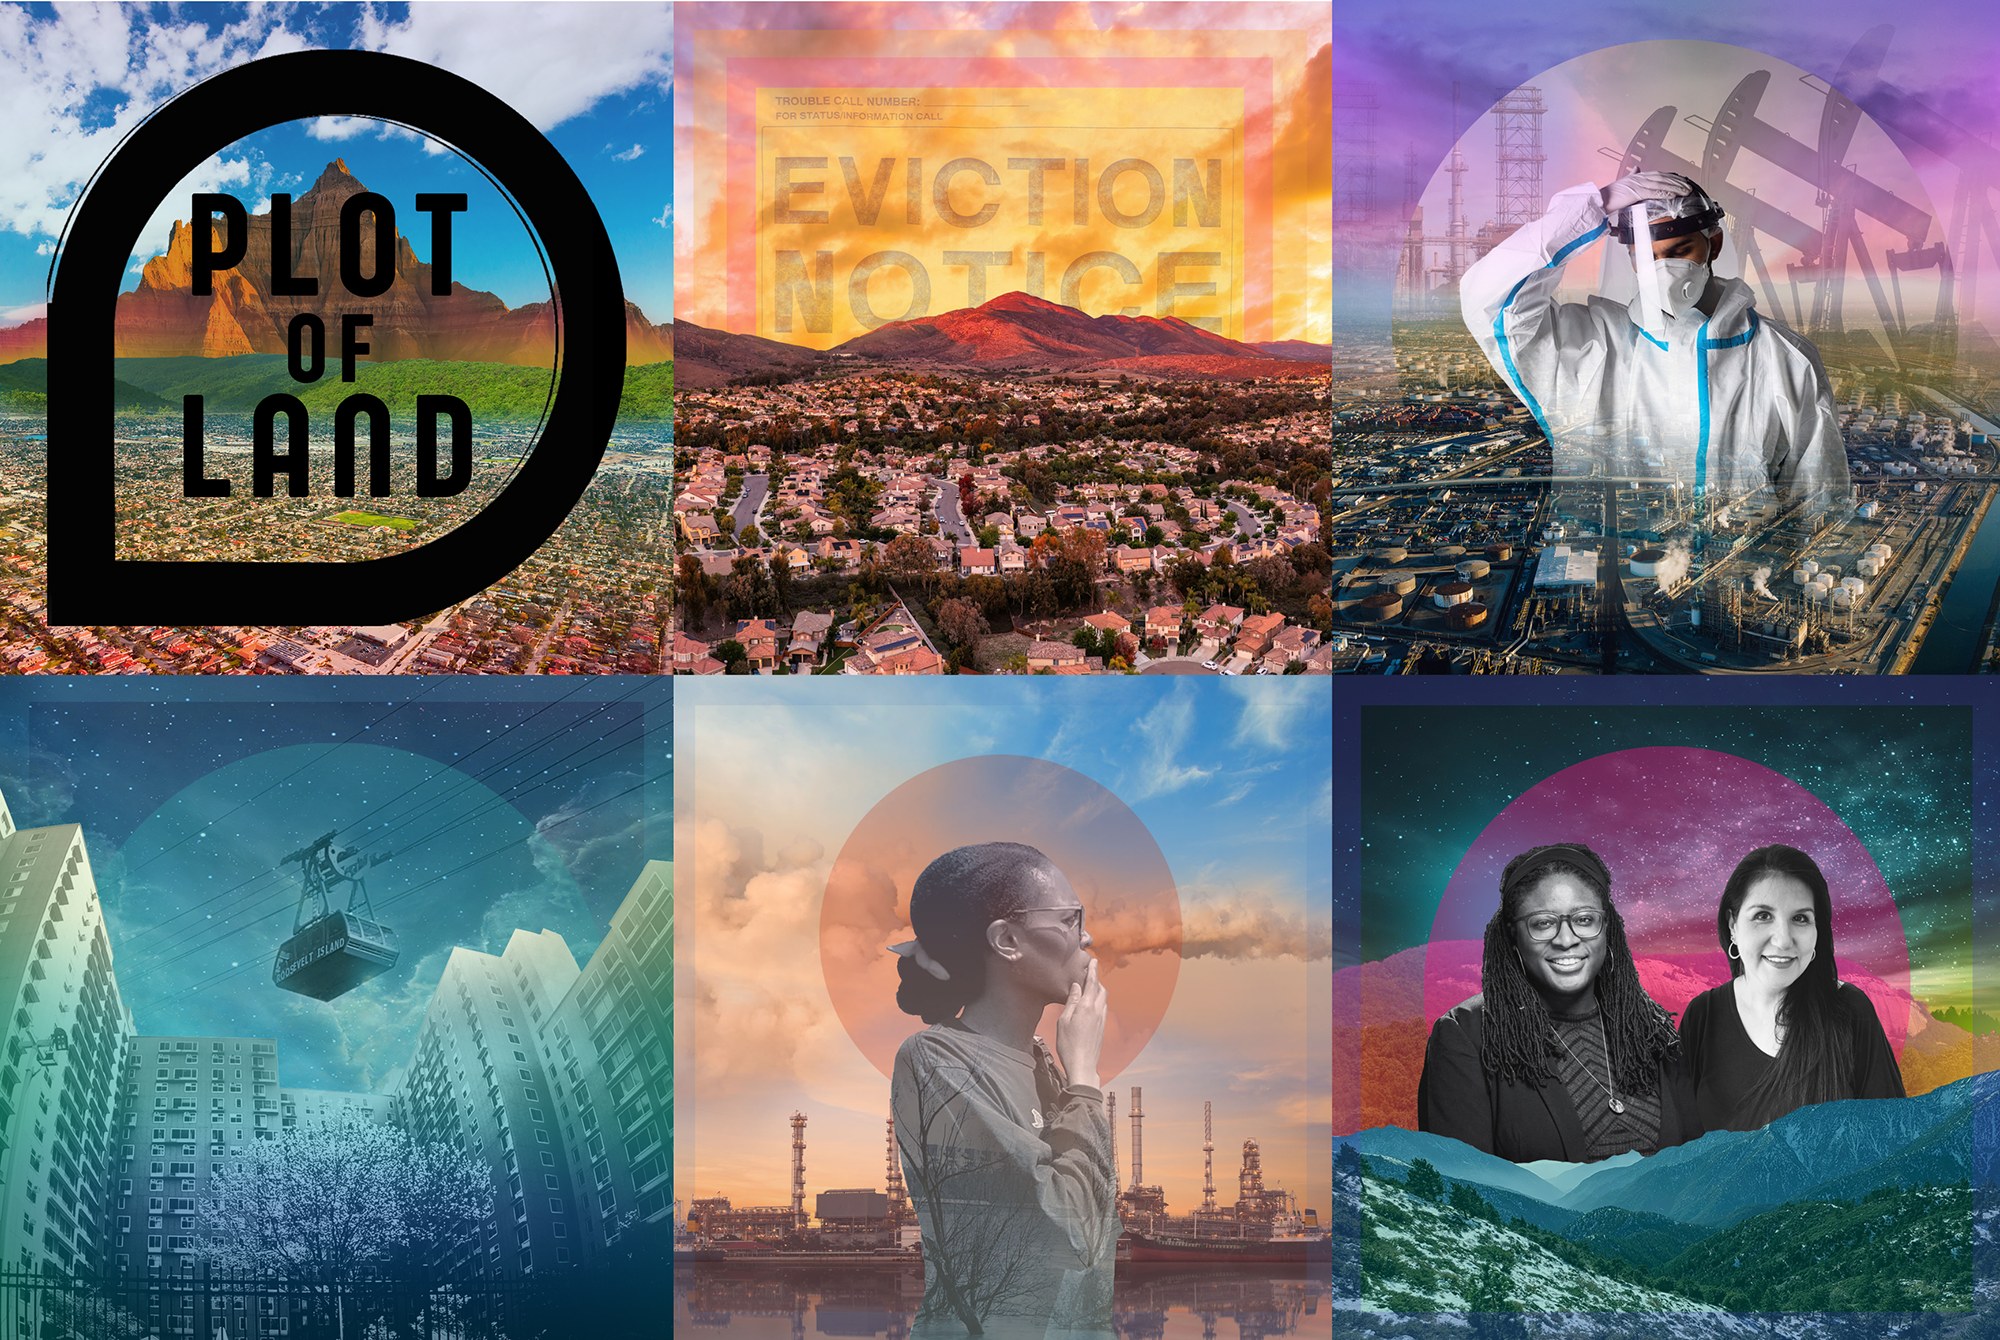 Collage of six graphic posters (depicting abstract concepts of land, power, environmental issues, etc.) created for various episodes of the Plot of Land Podcast series.